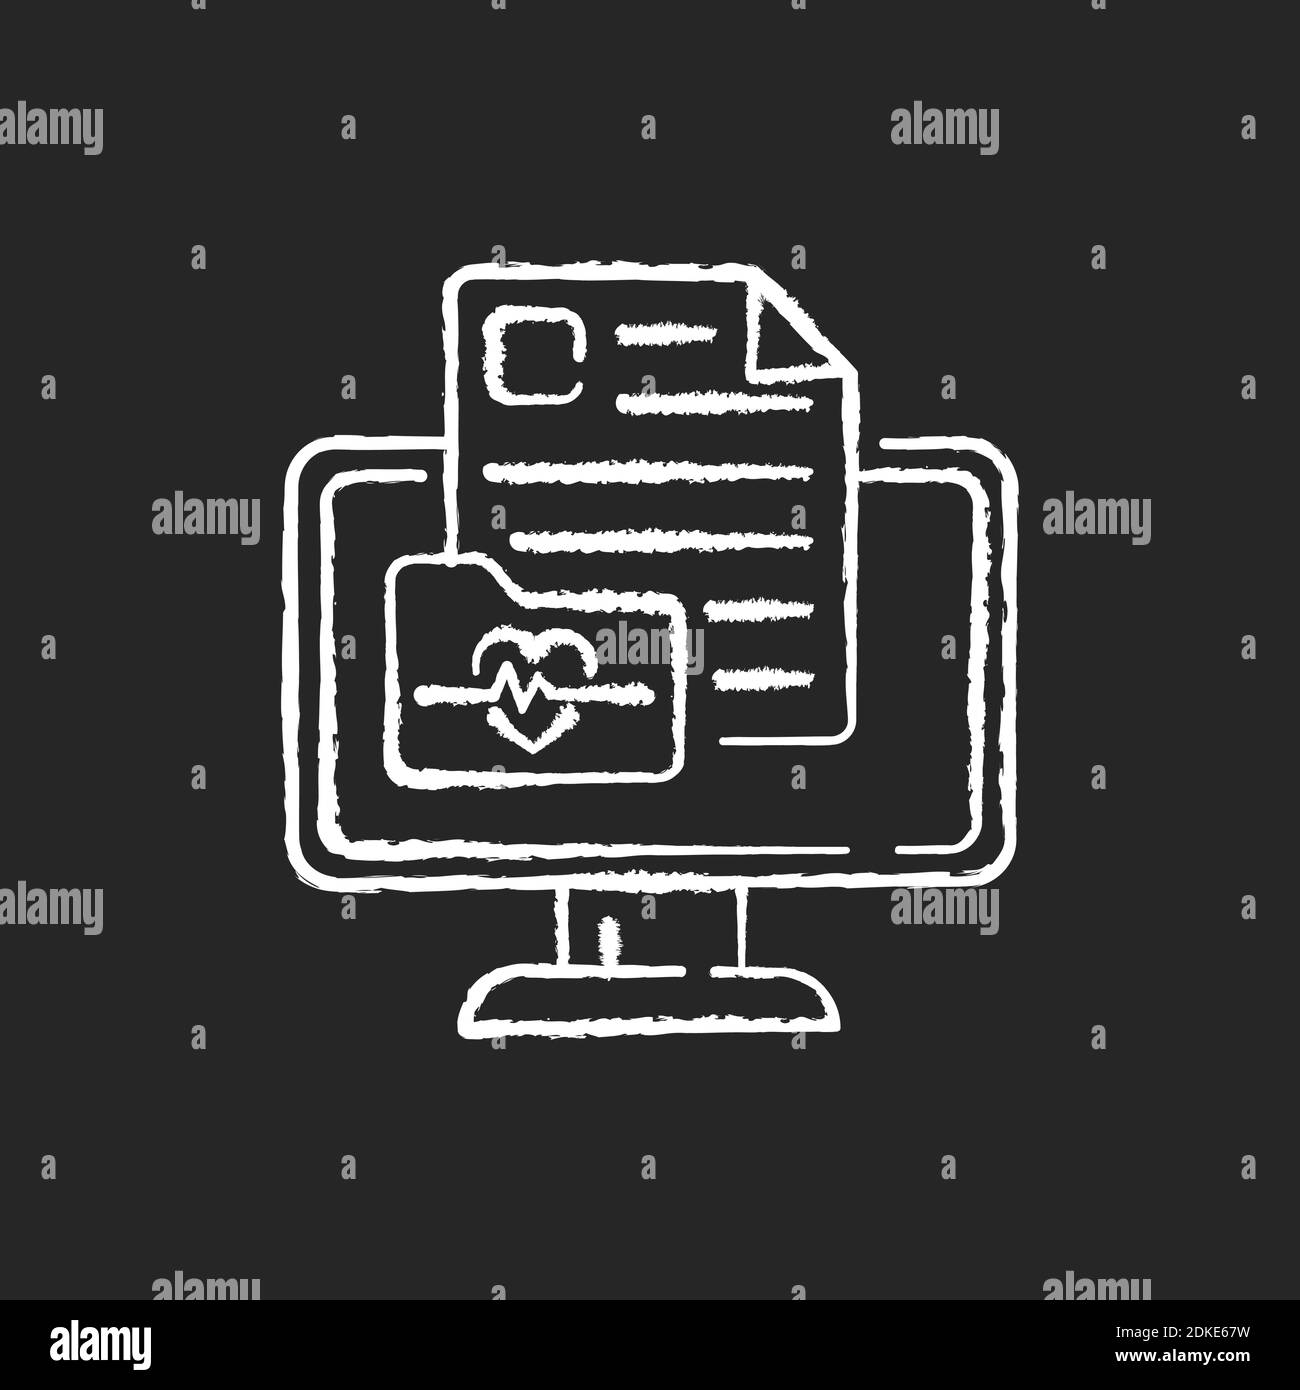 Online medical history chalk white icon on black background Stock Vector